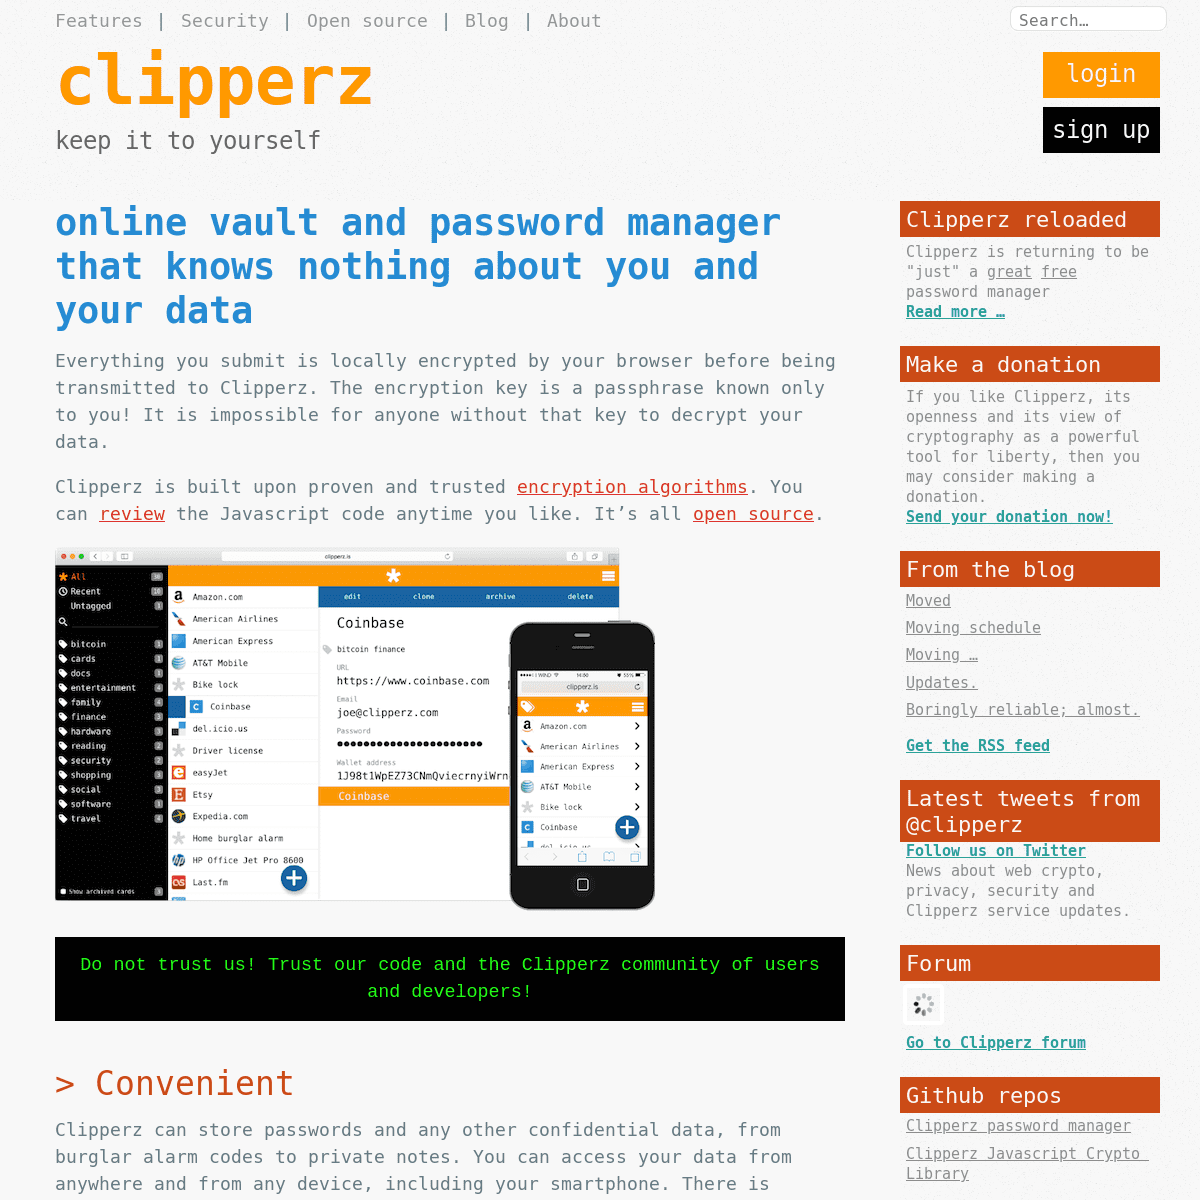 A complete backup of https://clipperz.com